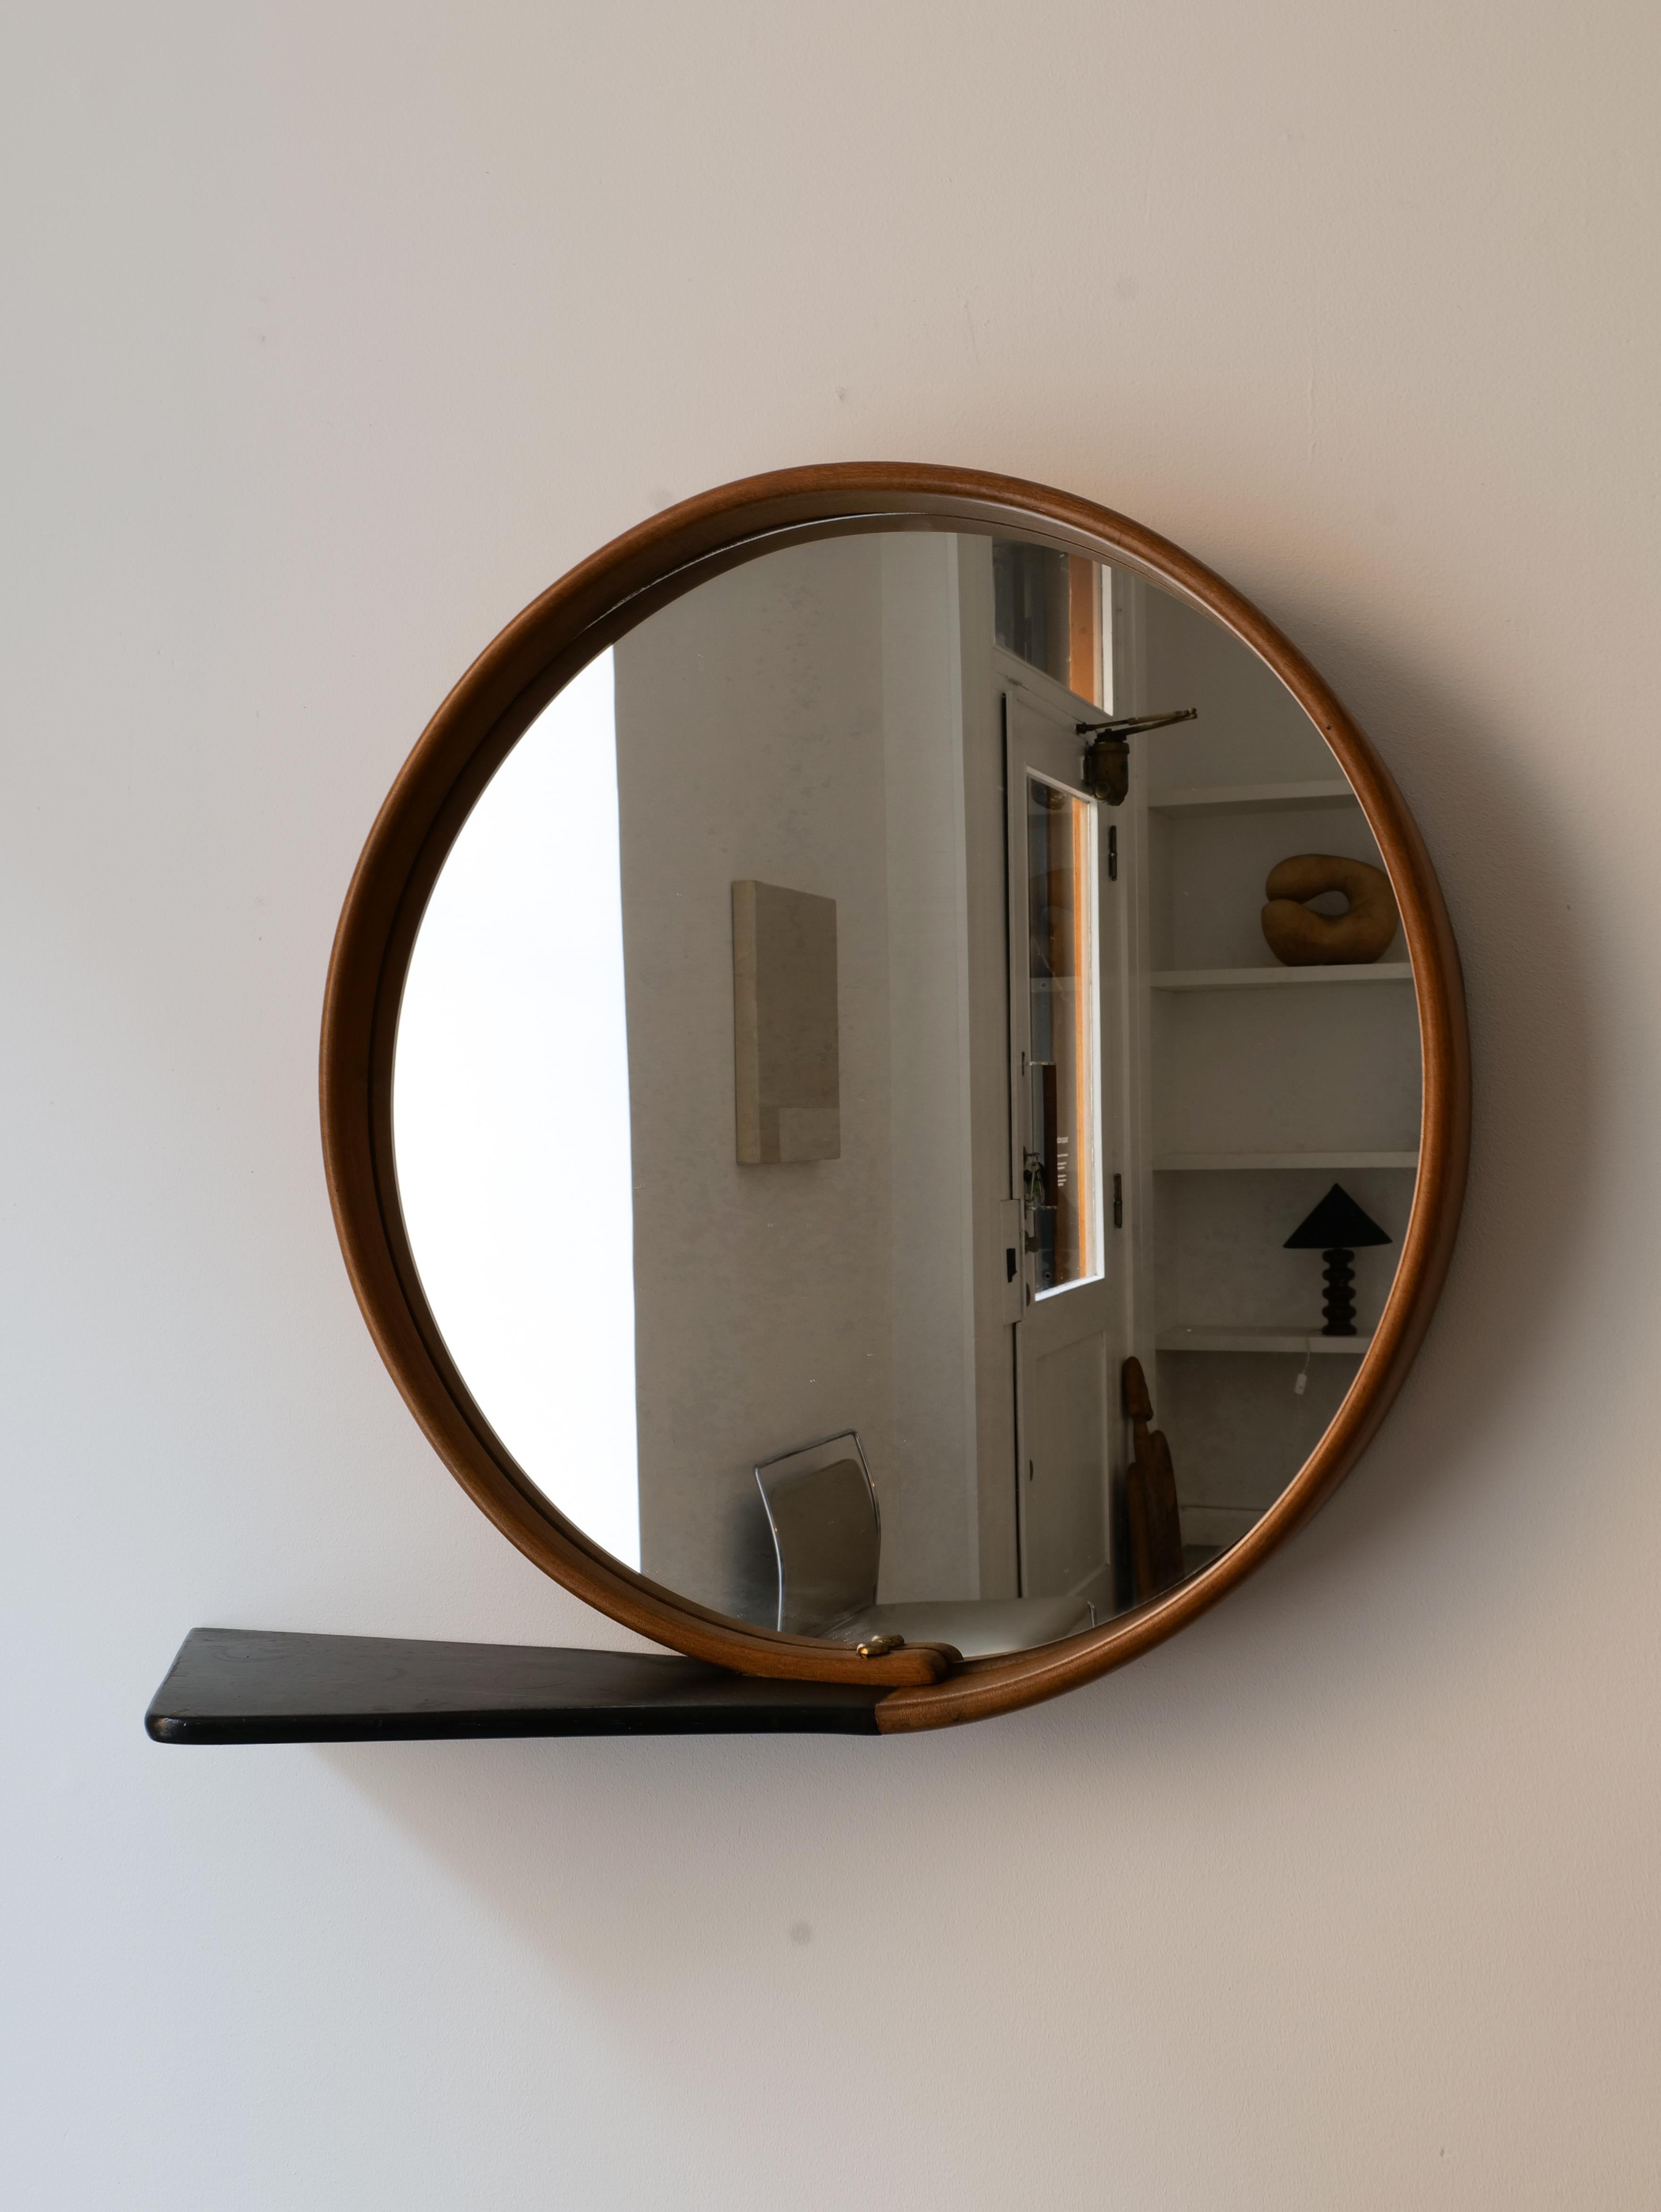 A beautifully crafted Swedish Modern circular mirror formed in one loop of wood around the entire mirror. Brass studs hold the loop in place with and extended piece that acts as a small vanity shelf stained  in contrast black.  An elegant piece by